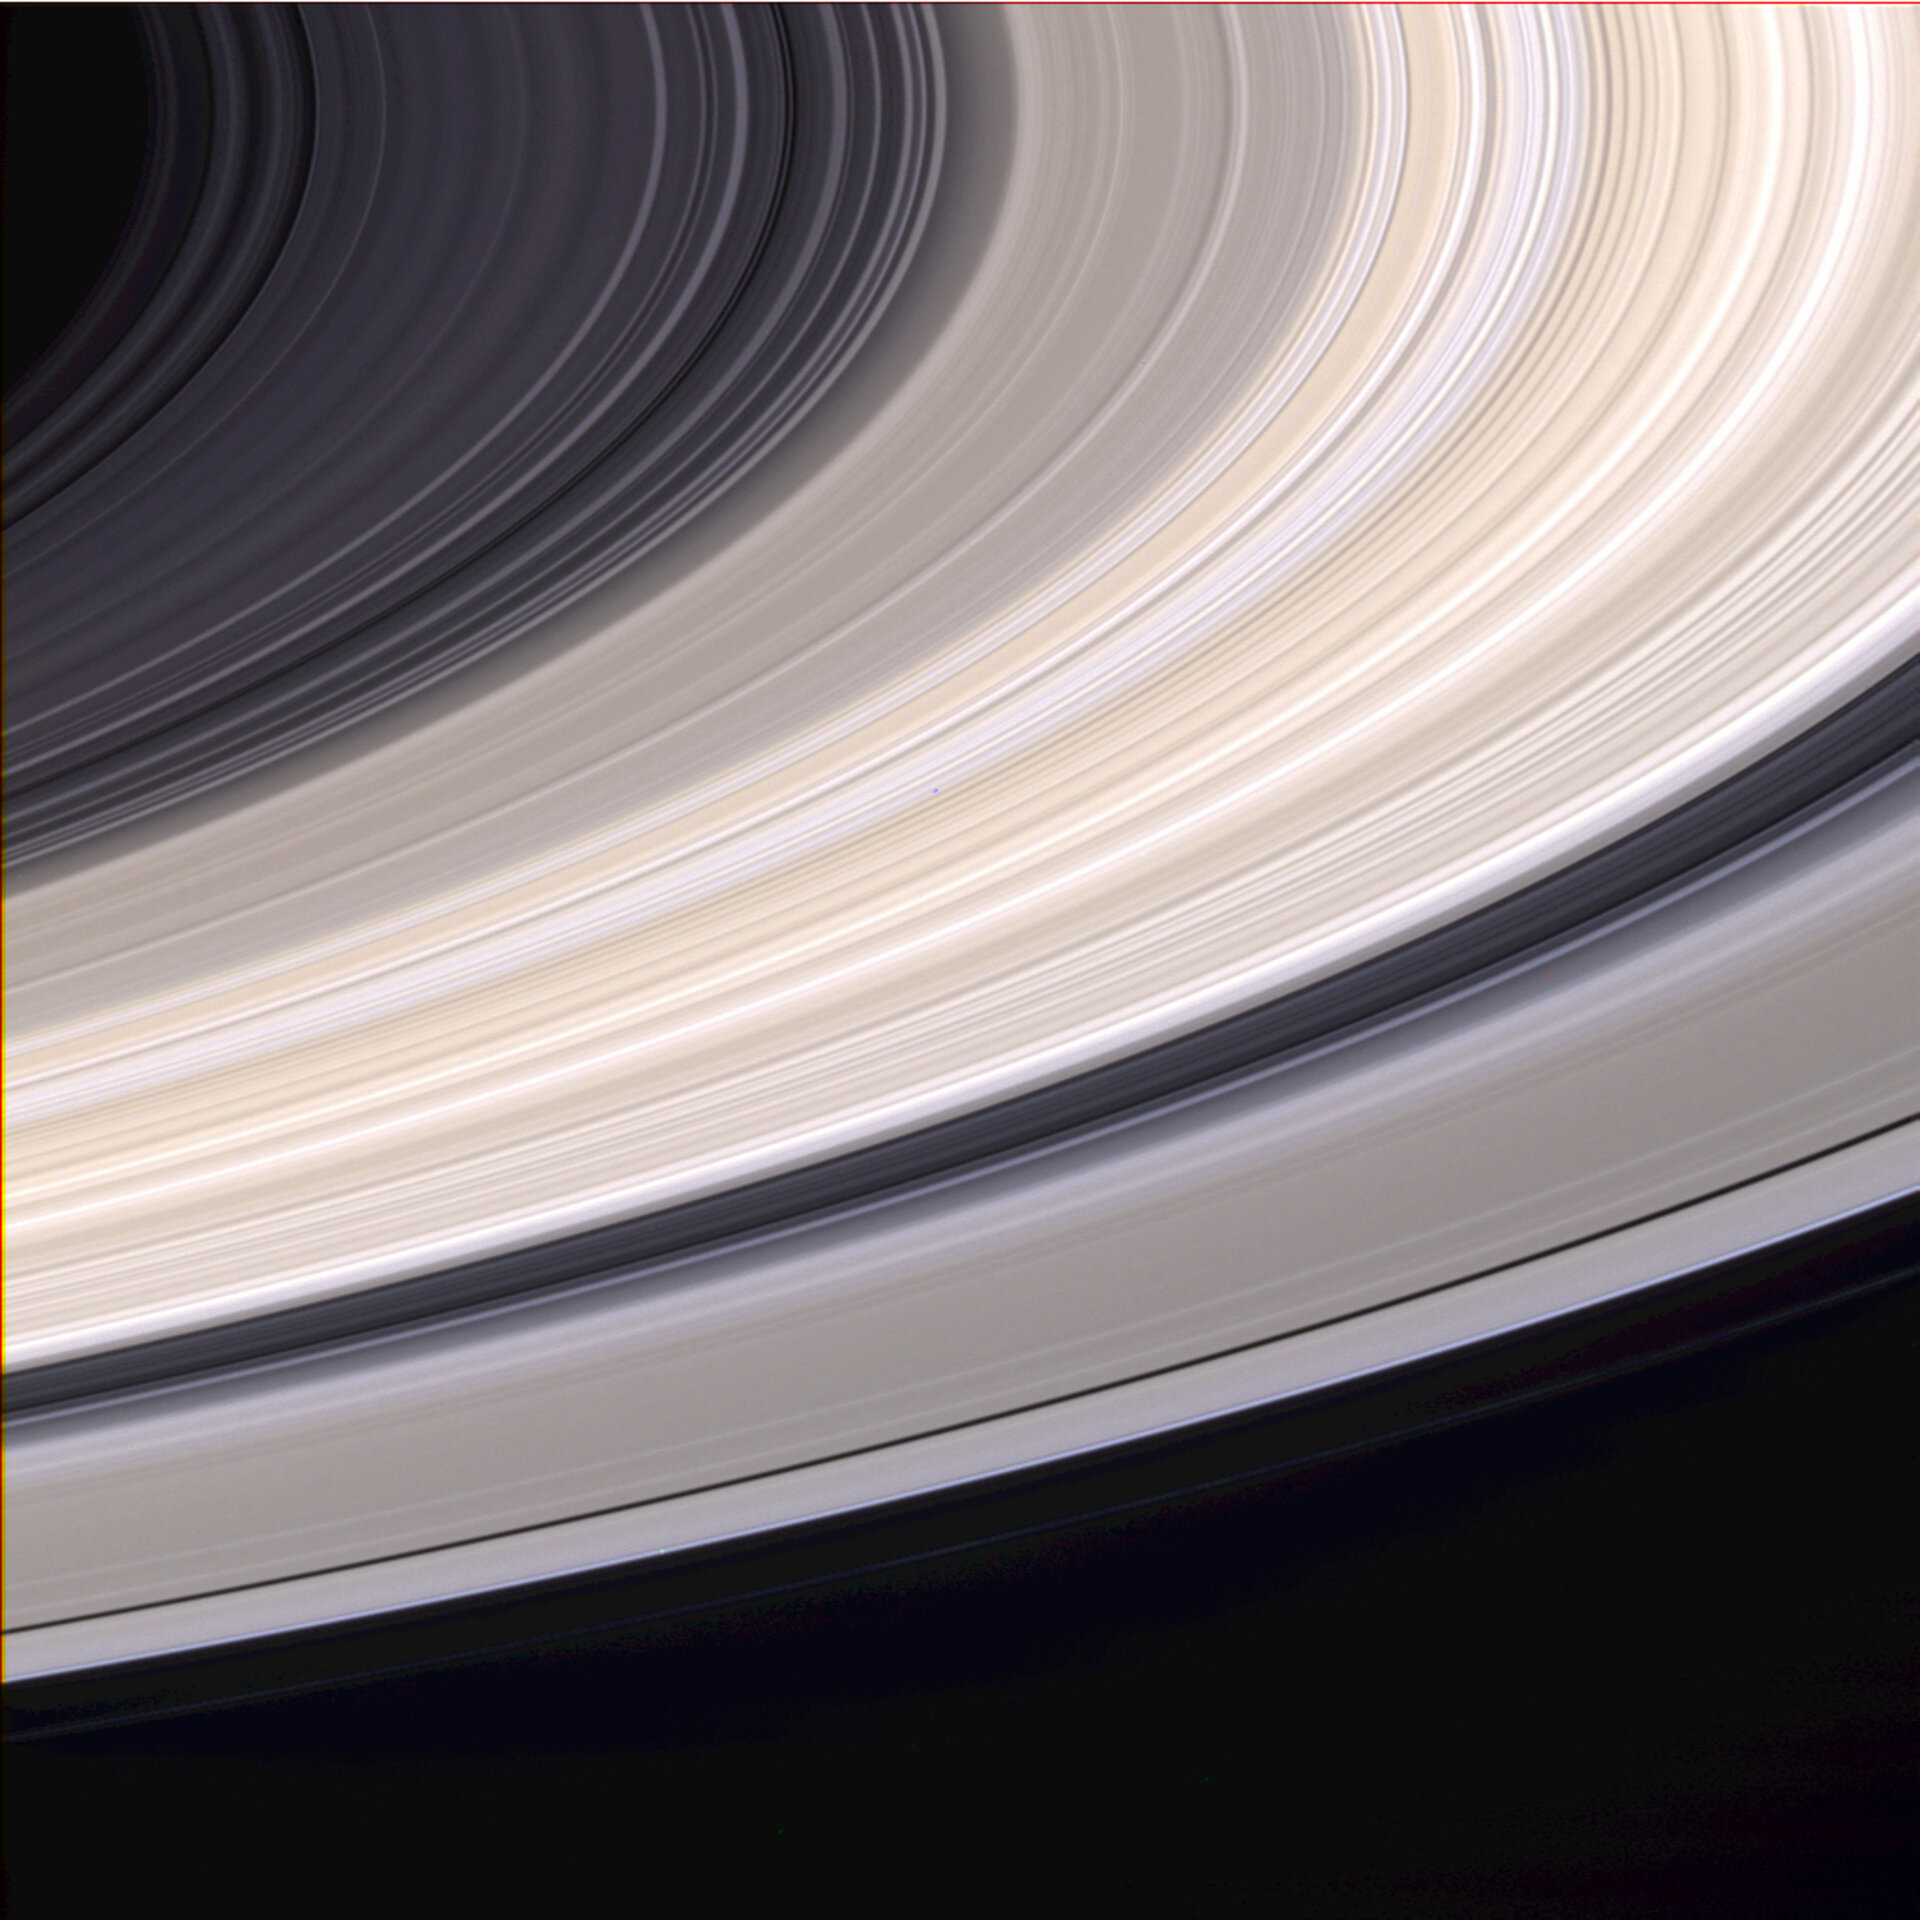 A rainbow on Saturn's rings : r/space